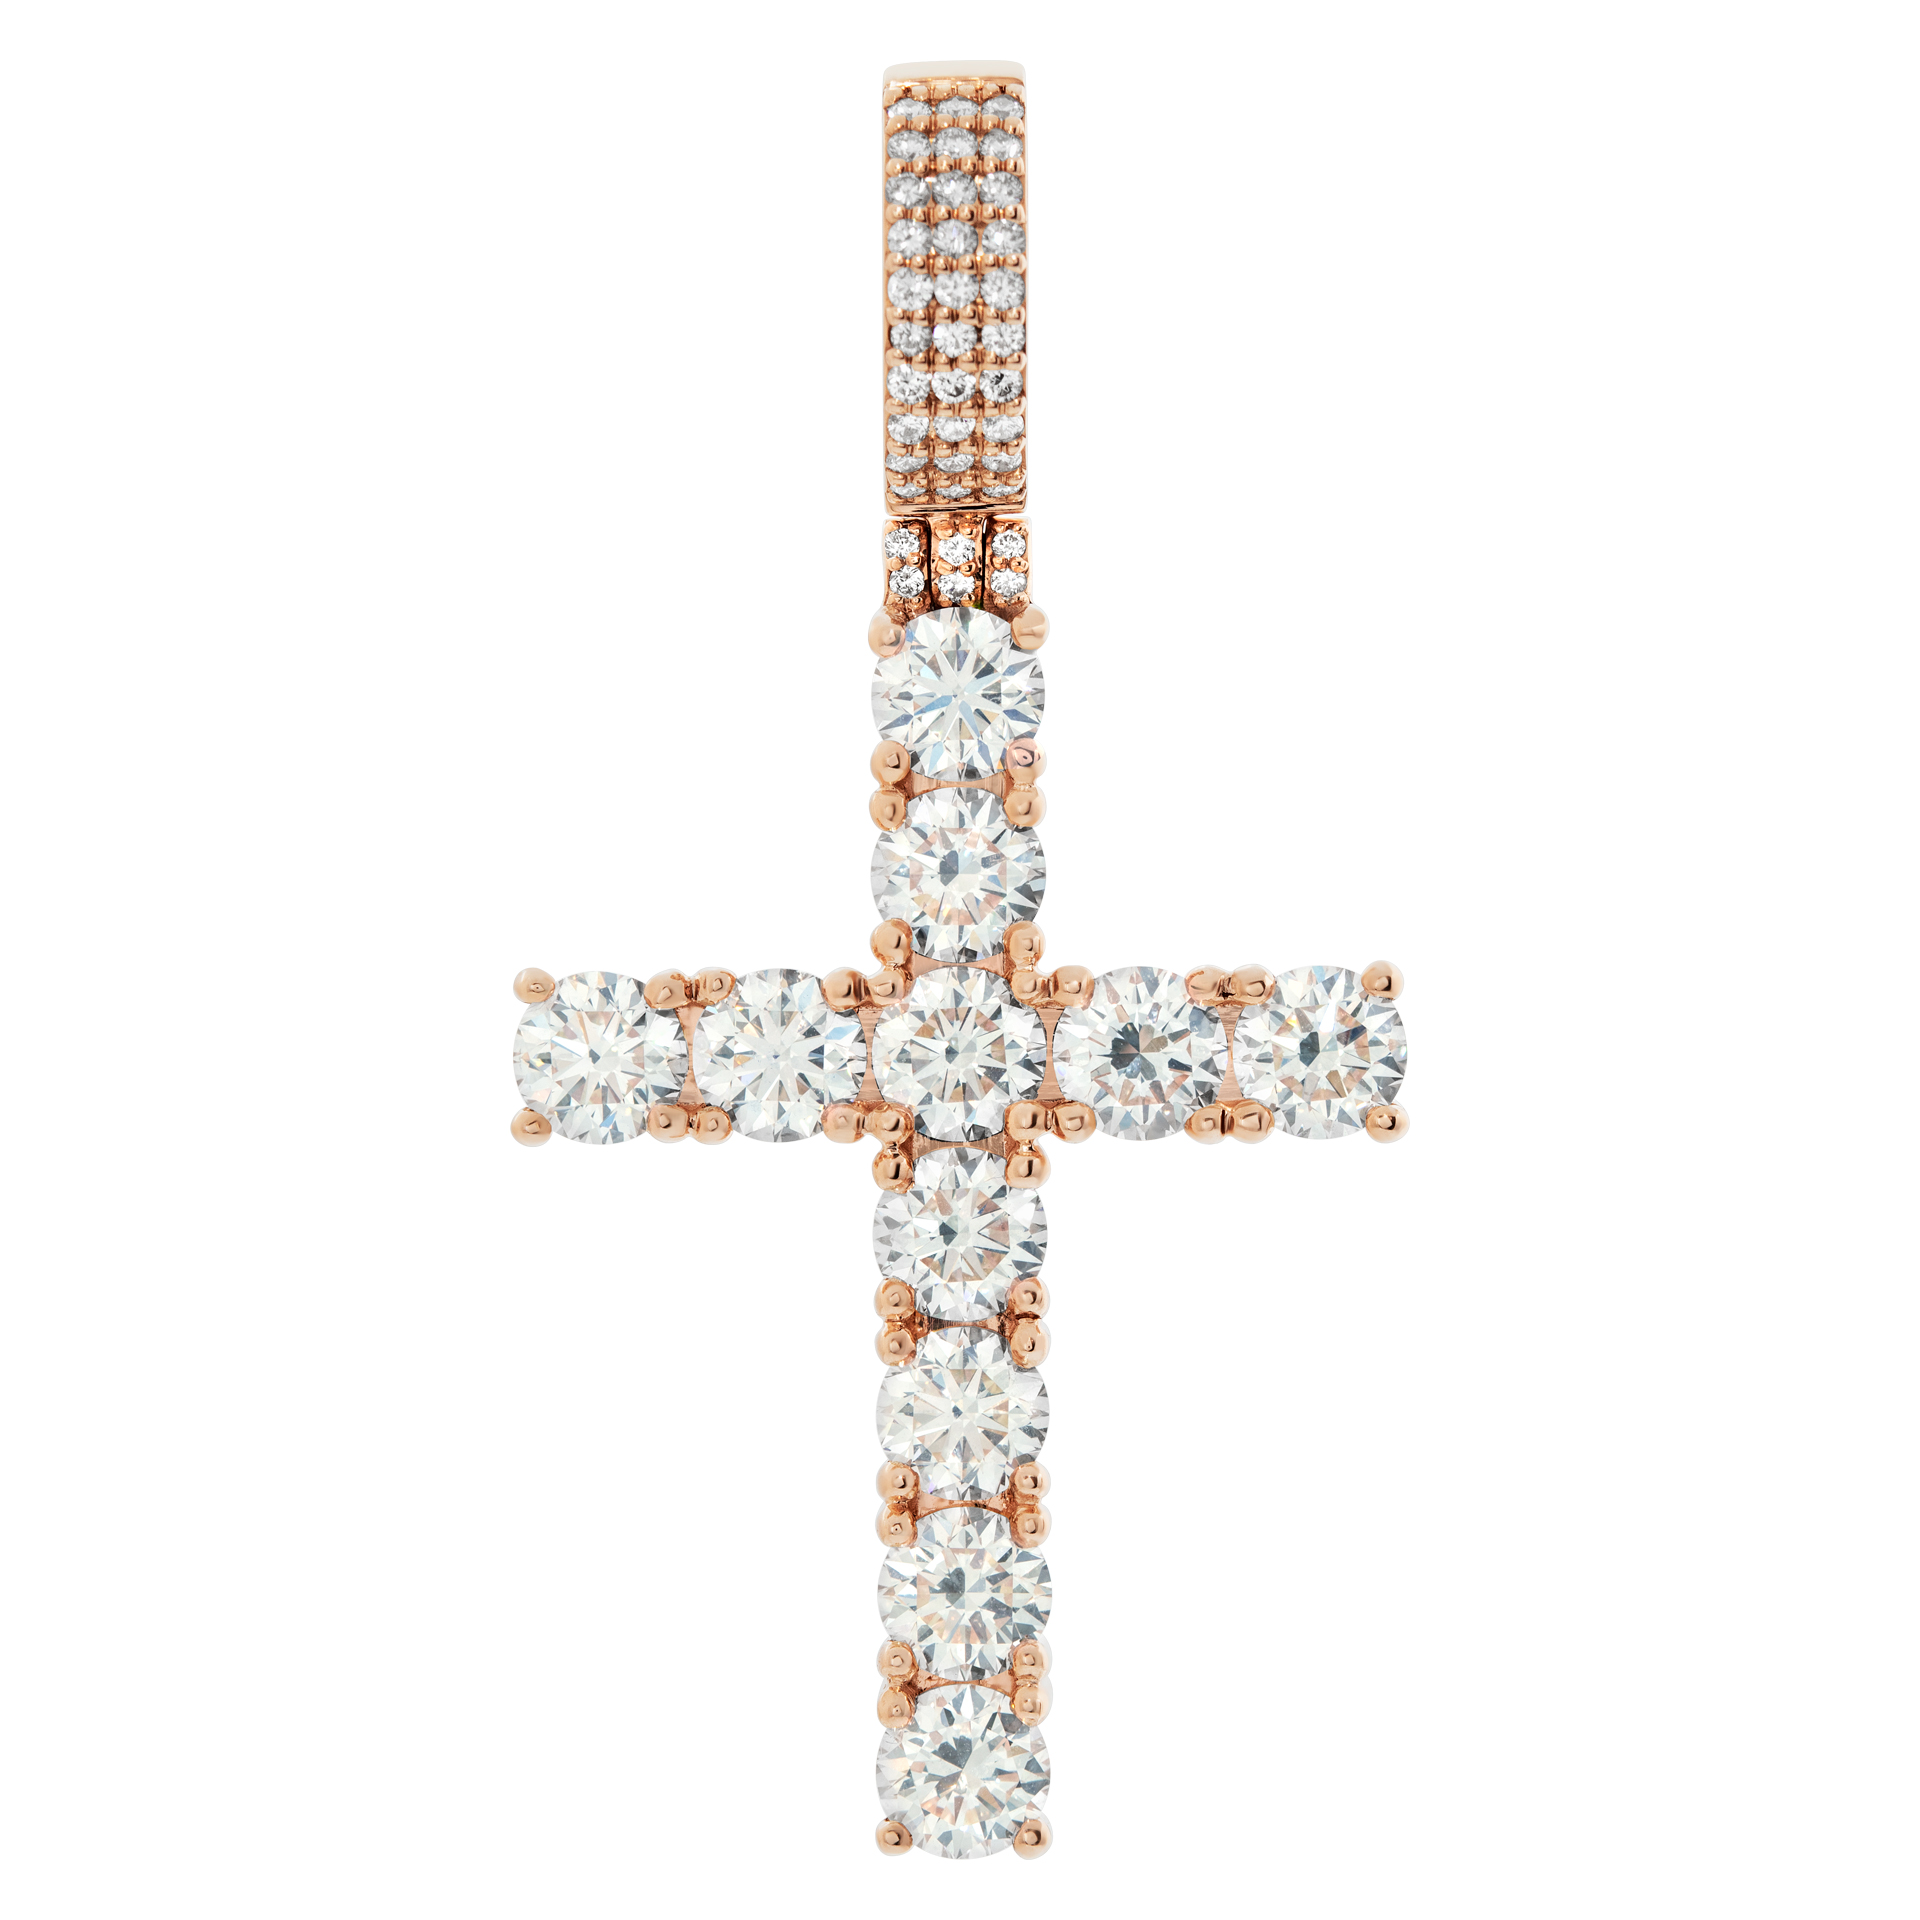 Diamond cross pendant in 14k rose gold. Round brilliant cut diamonds total approx. weight 8.00 carats. image 1